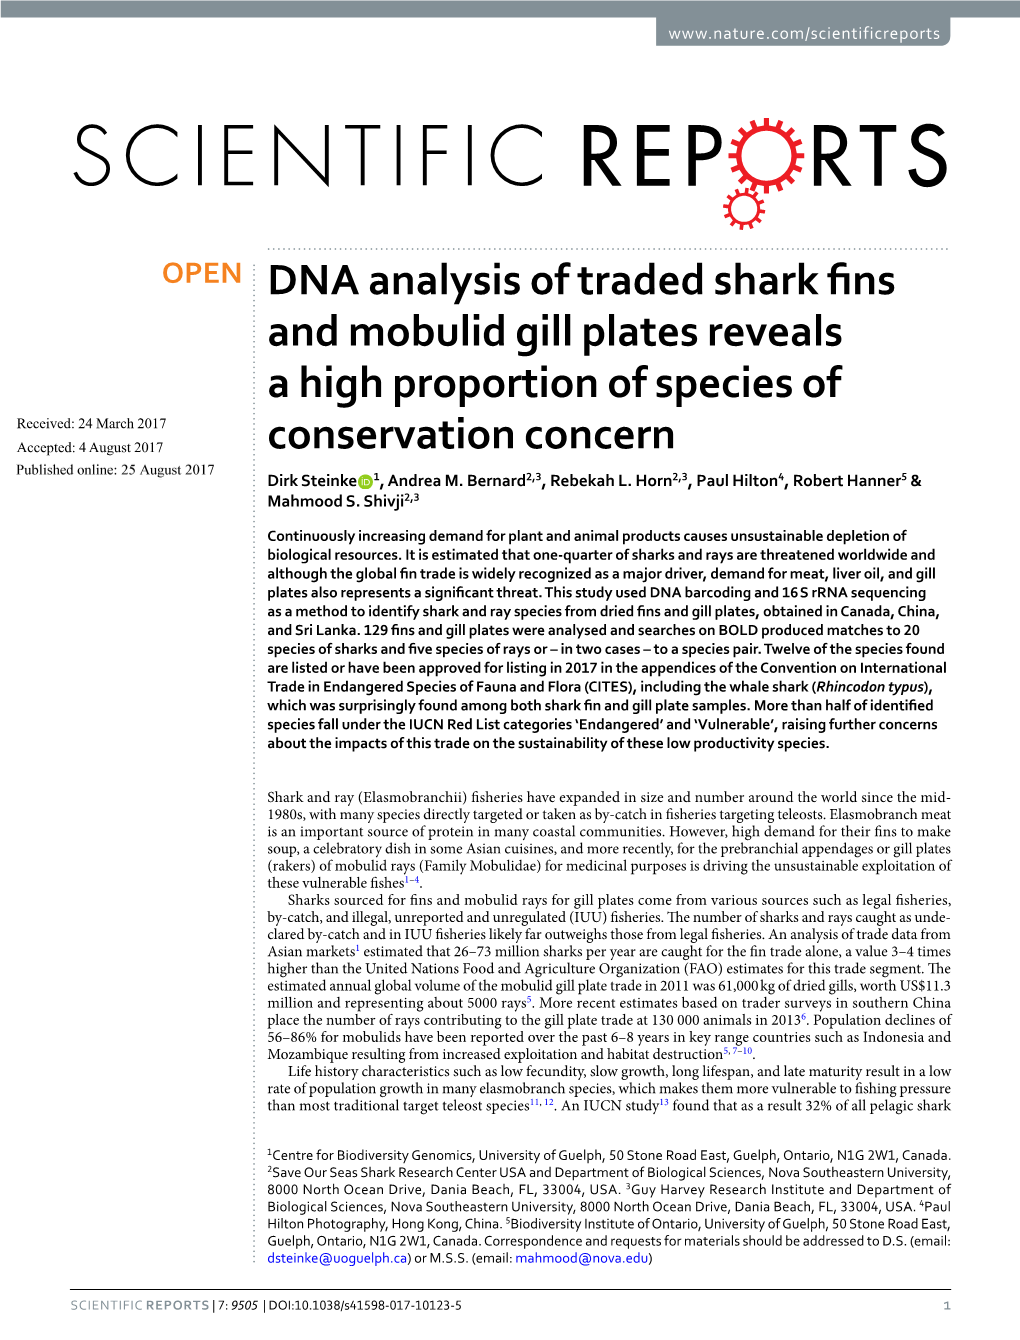 DNA Analysis of Traded Shark Fins and Mobulid Gill Plates Reveals a High